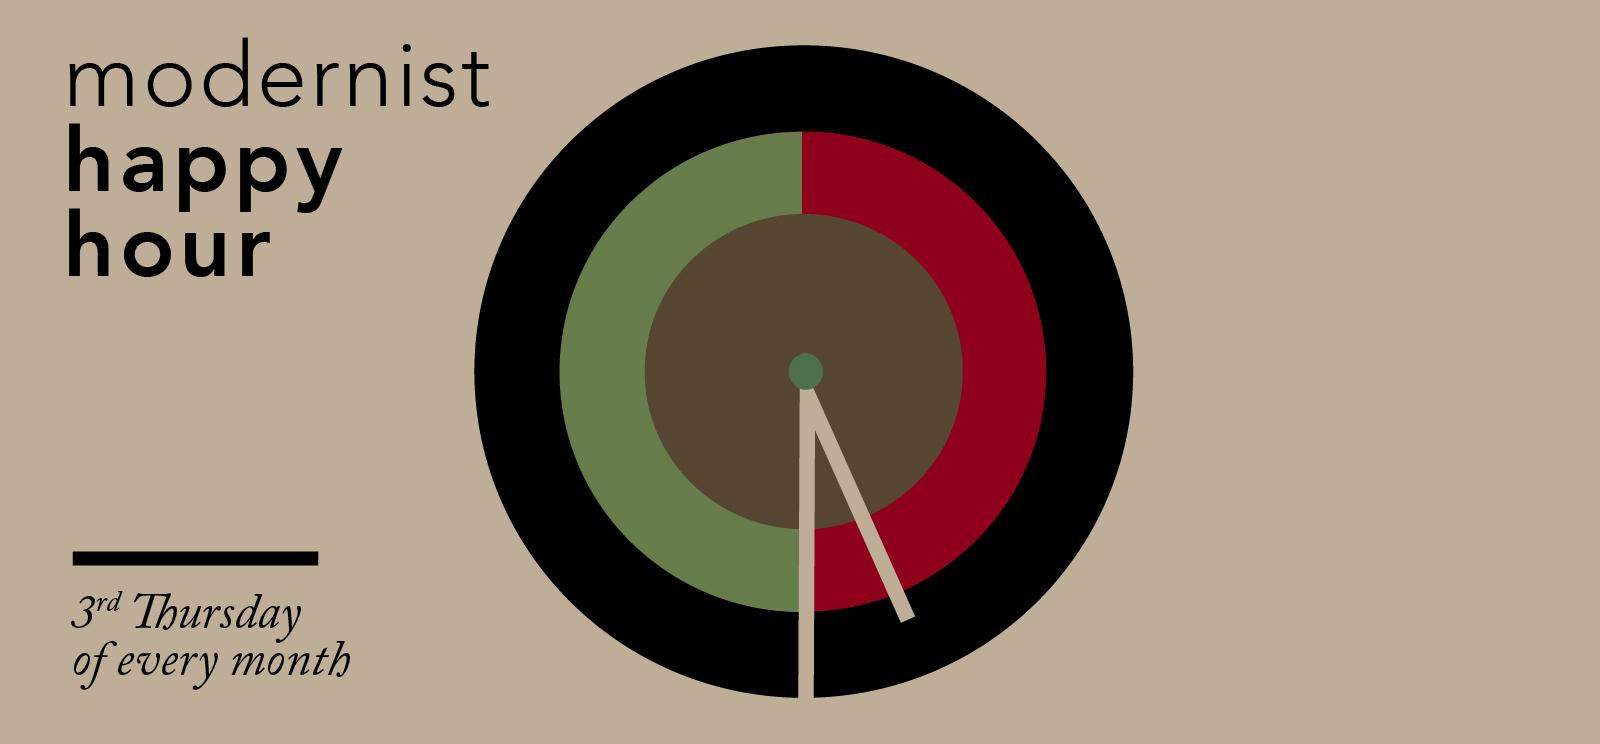 Image: Modernist Happy Hour clock logo in red, green and brown colors. Text: modernist happy hour / 3rd Thursday of every month